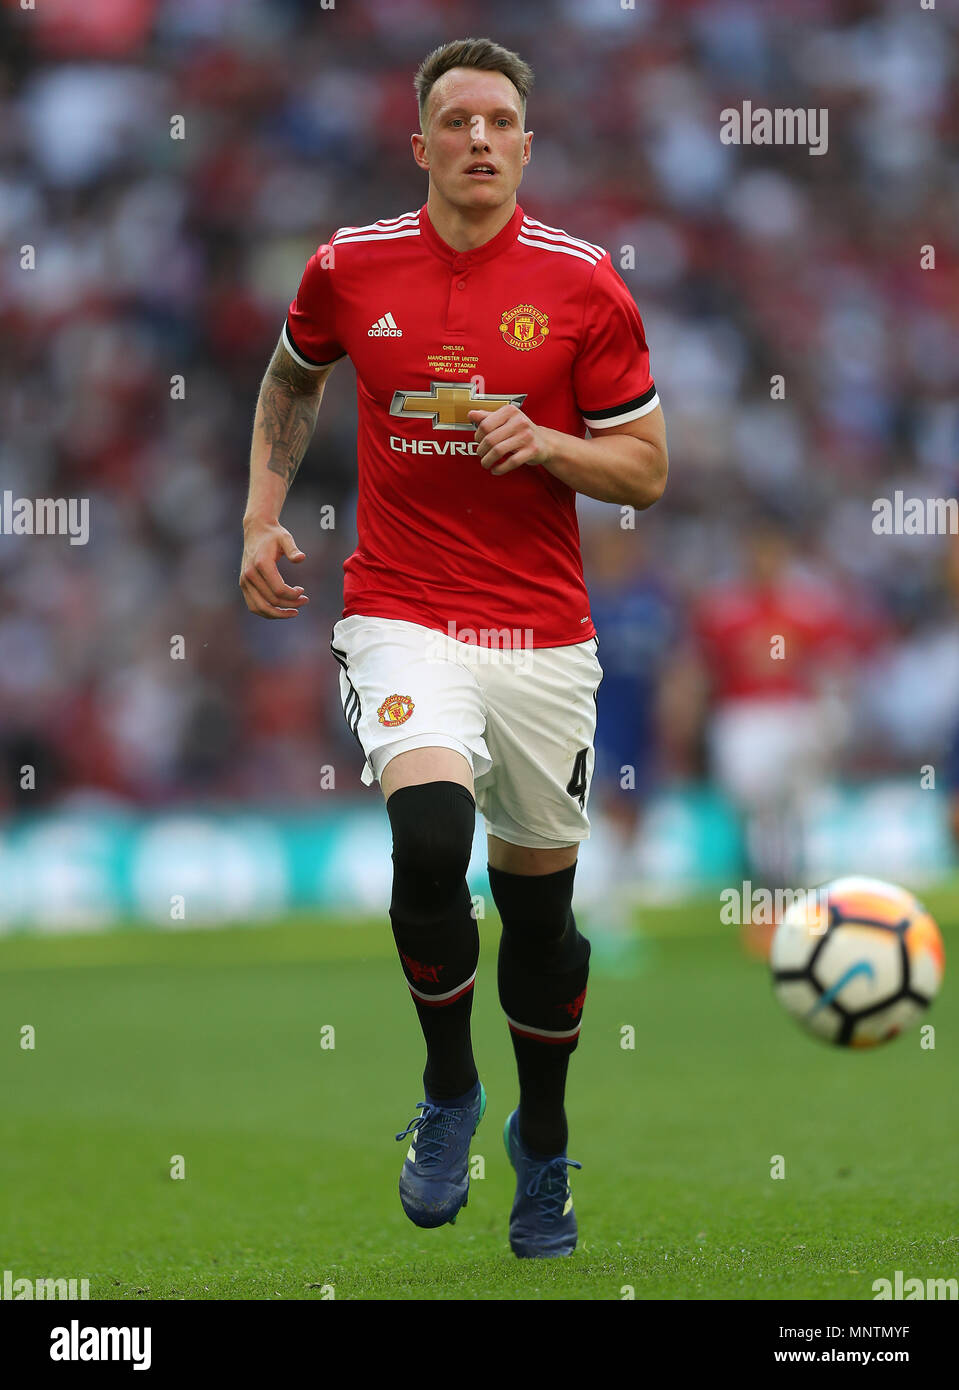 Manchester United's Phil Jones during the Emirates FA Cup Final at Wembley Stadium, London. PRESS ASSOCIATION Photo. Picture date: Saturday May 19, 2018. See PA story SOCCER FA Cup. Photo credit should read: David Davies/PA Wire. RESTRICTIONS: EDITORIAL USE ONLY No use with unauthorised audio, video, data, fixture lists, club/league logos or 'live' services. Online in-match use limited to 75 images, no video emulation. No use in betting, games or single club/league/player publications. Stock Photo